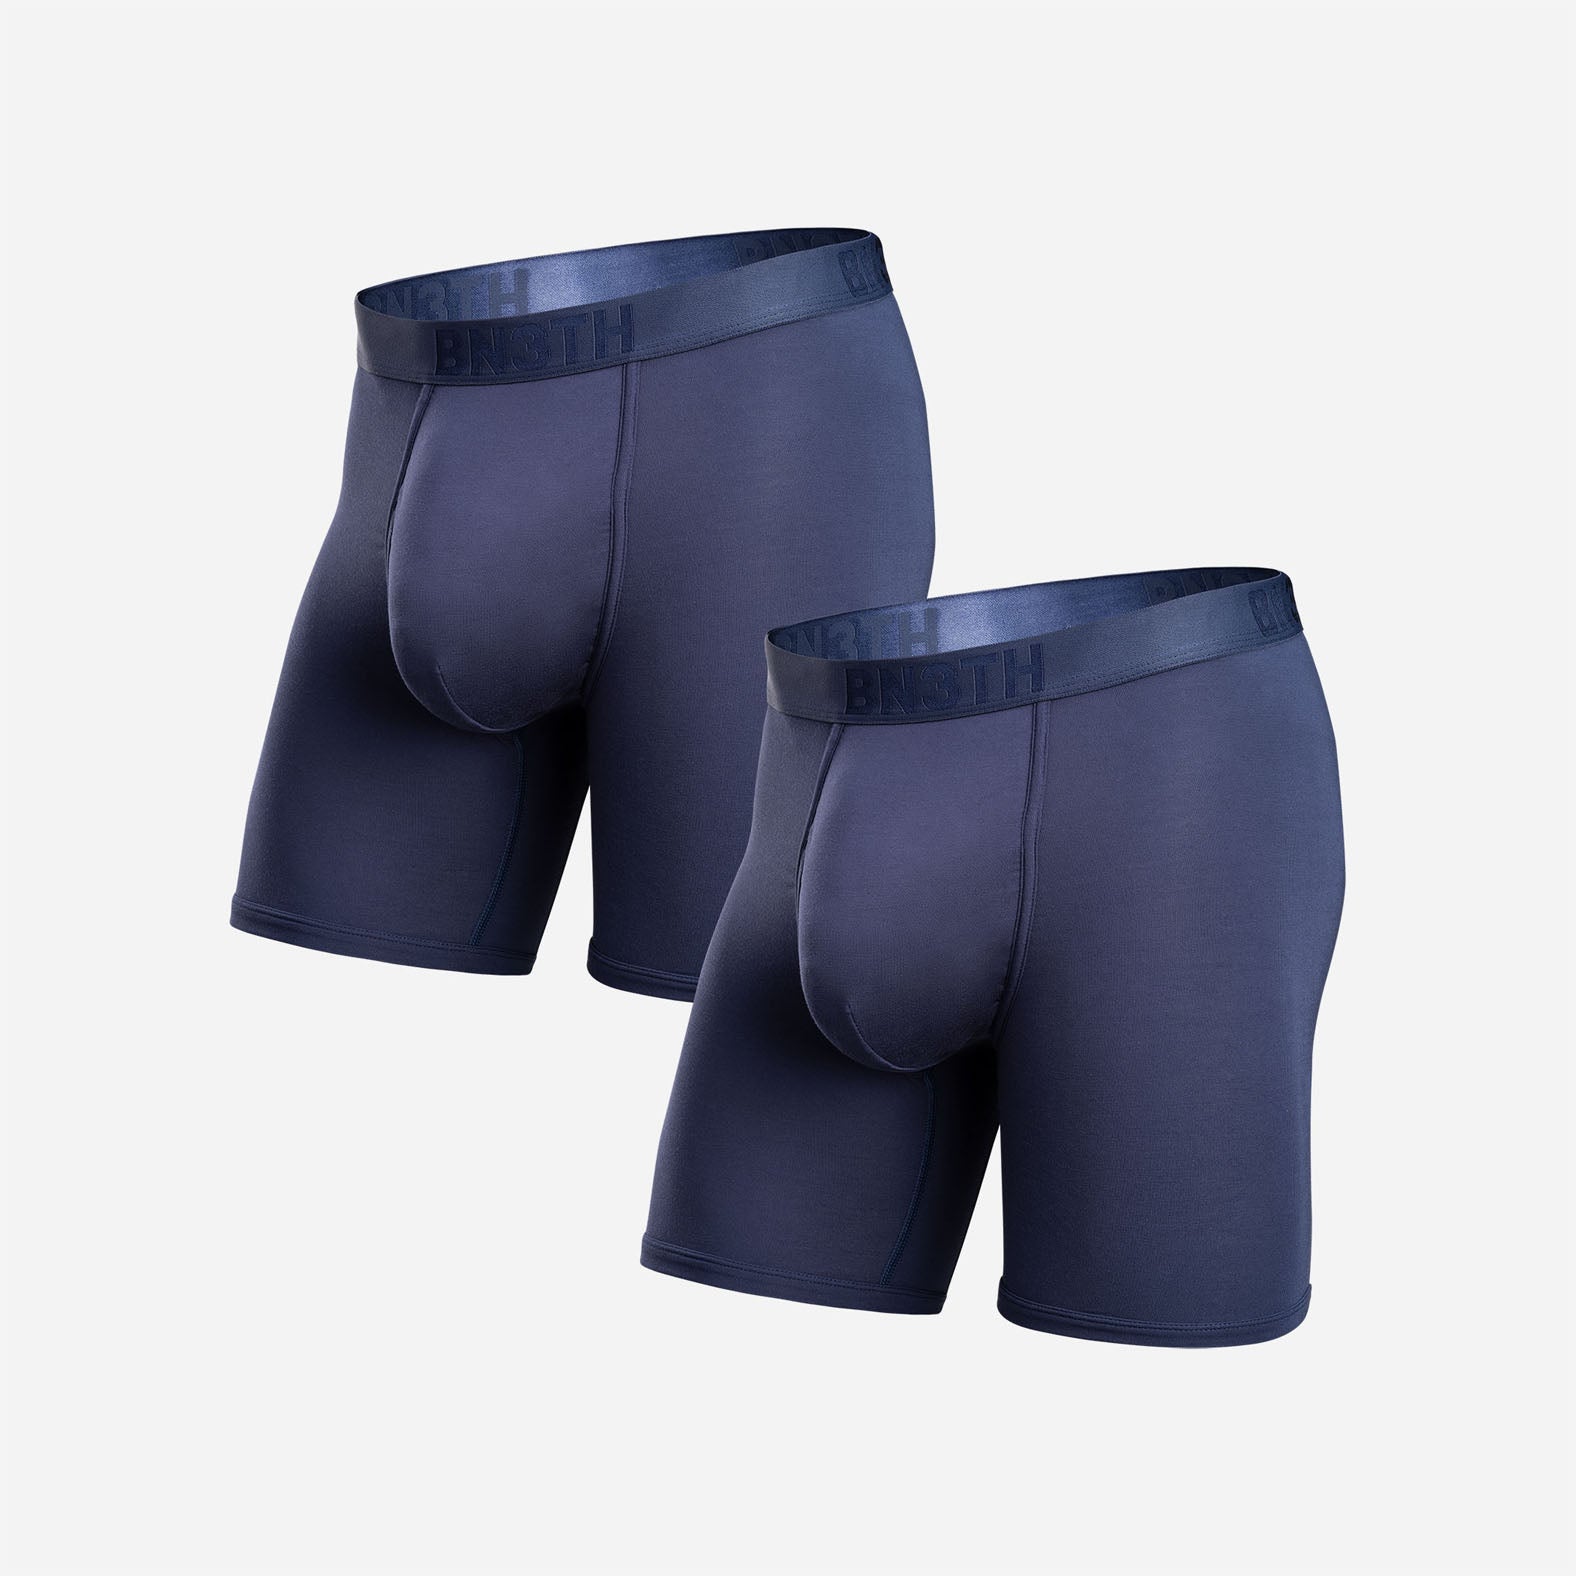 Classic Boxer Brief: Navy/Pineapple Fade Fog 2 Pack